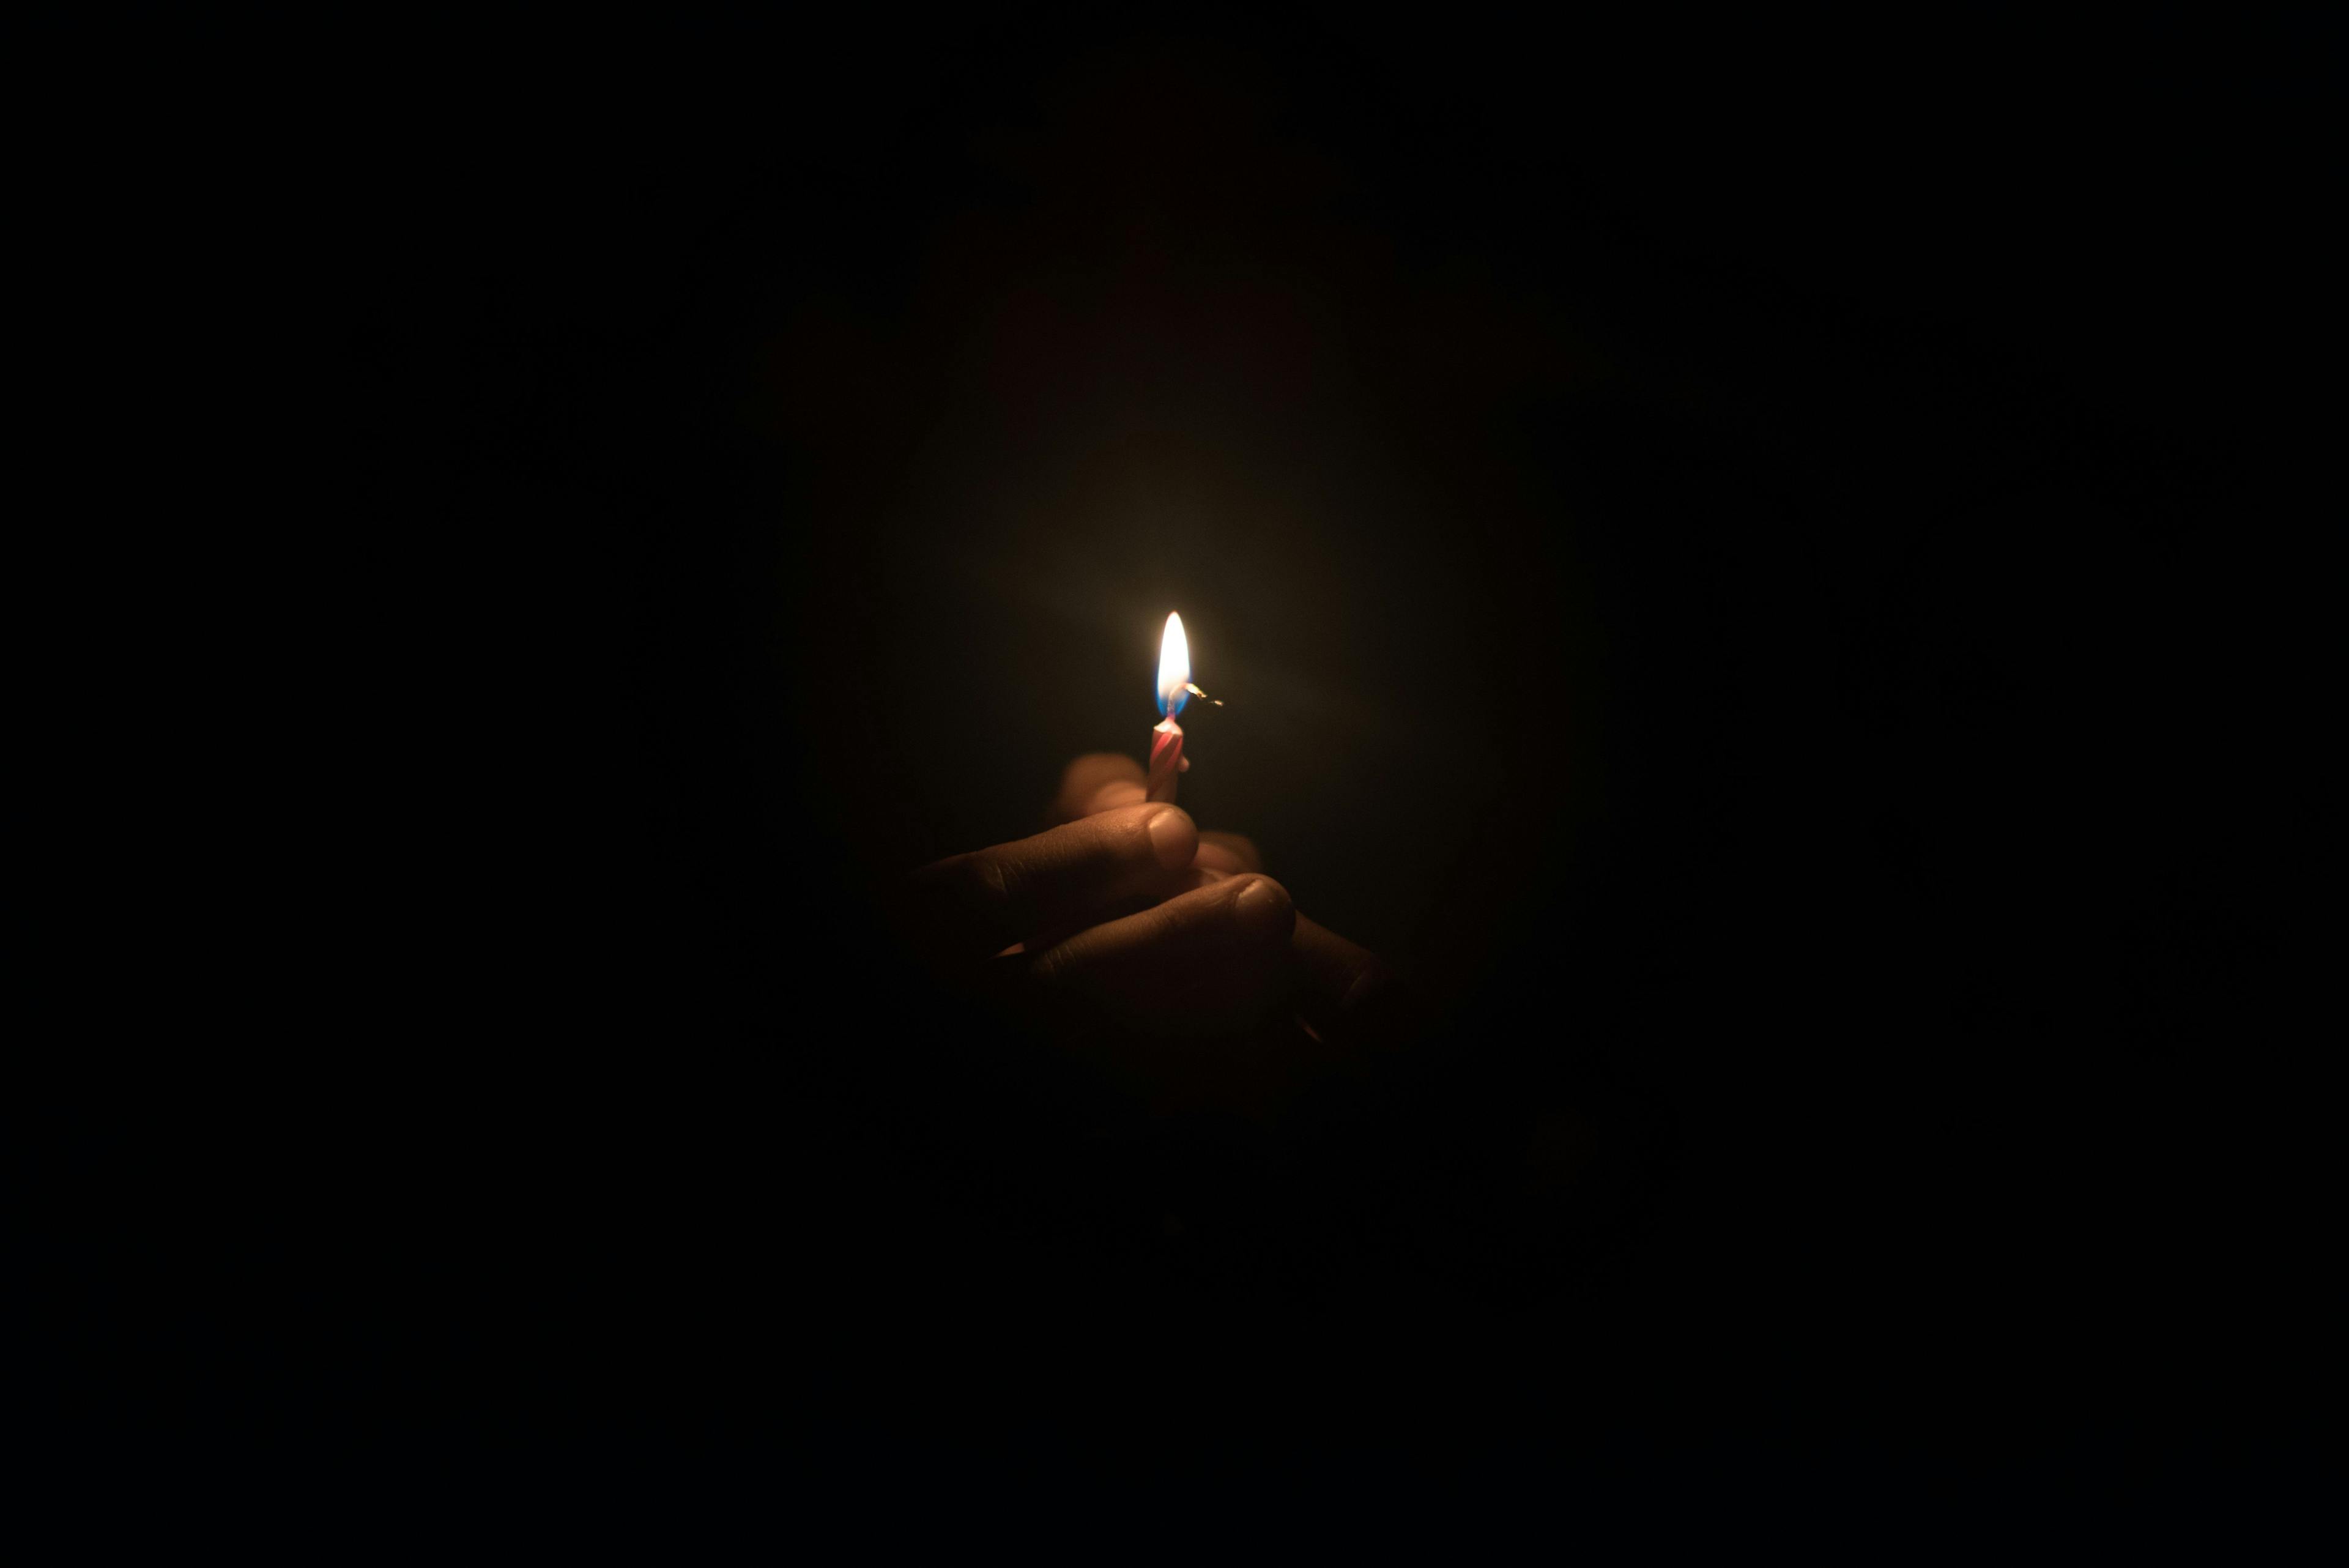 hand holding burning candle in the ark | Image credit: © - rushay © - stock.adobe.com